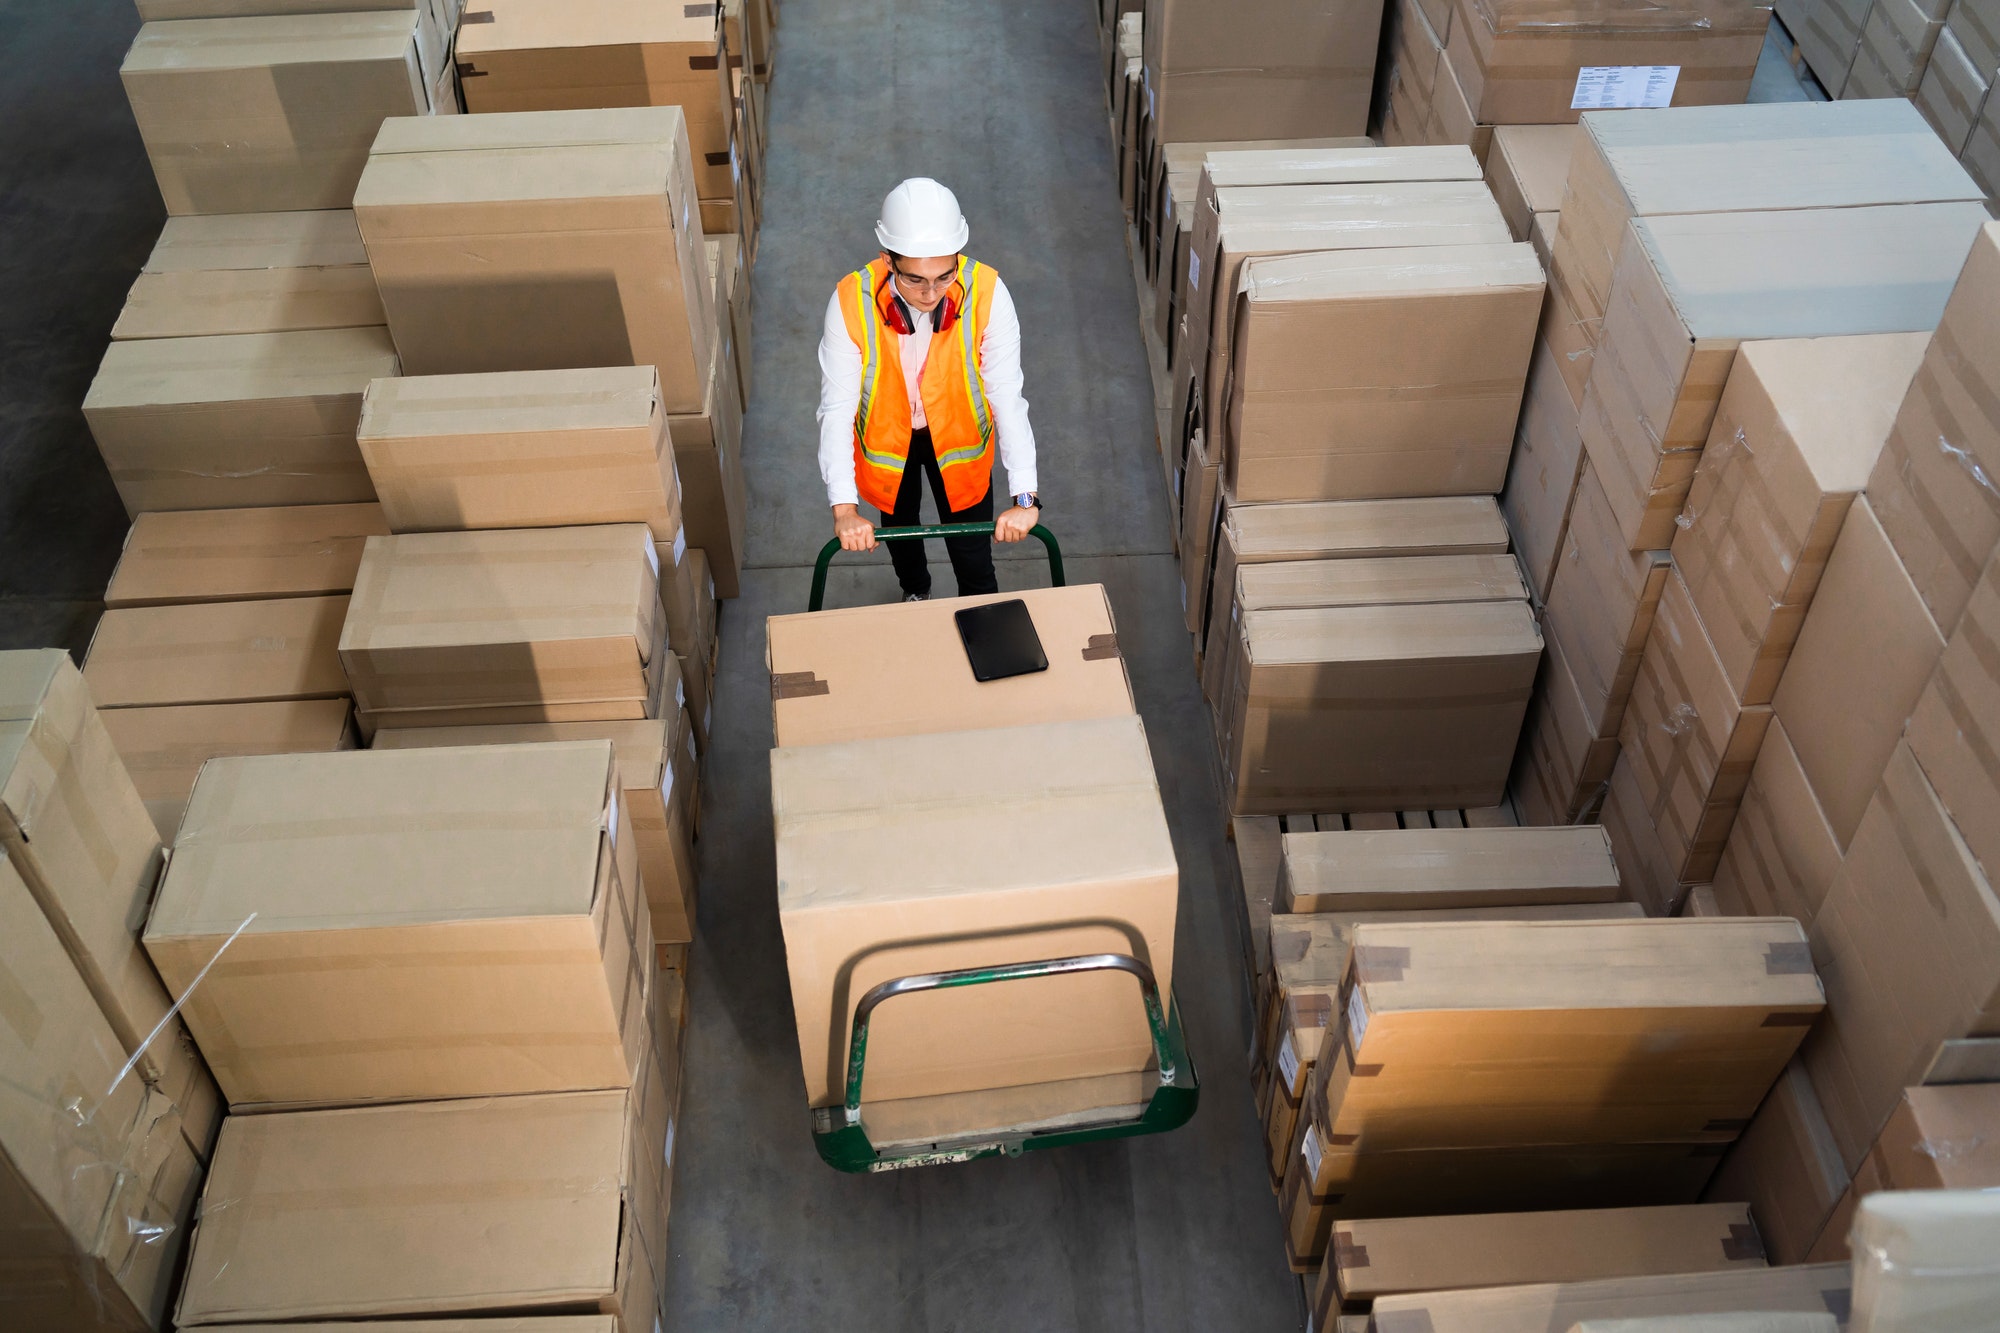 Logistic warehouse worker delivering boxes on a trolley